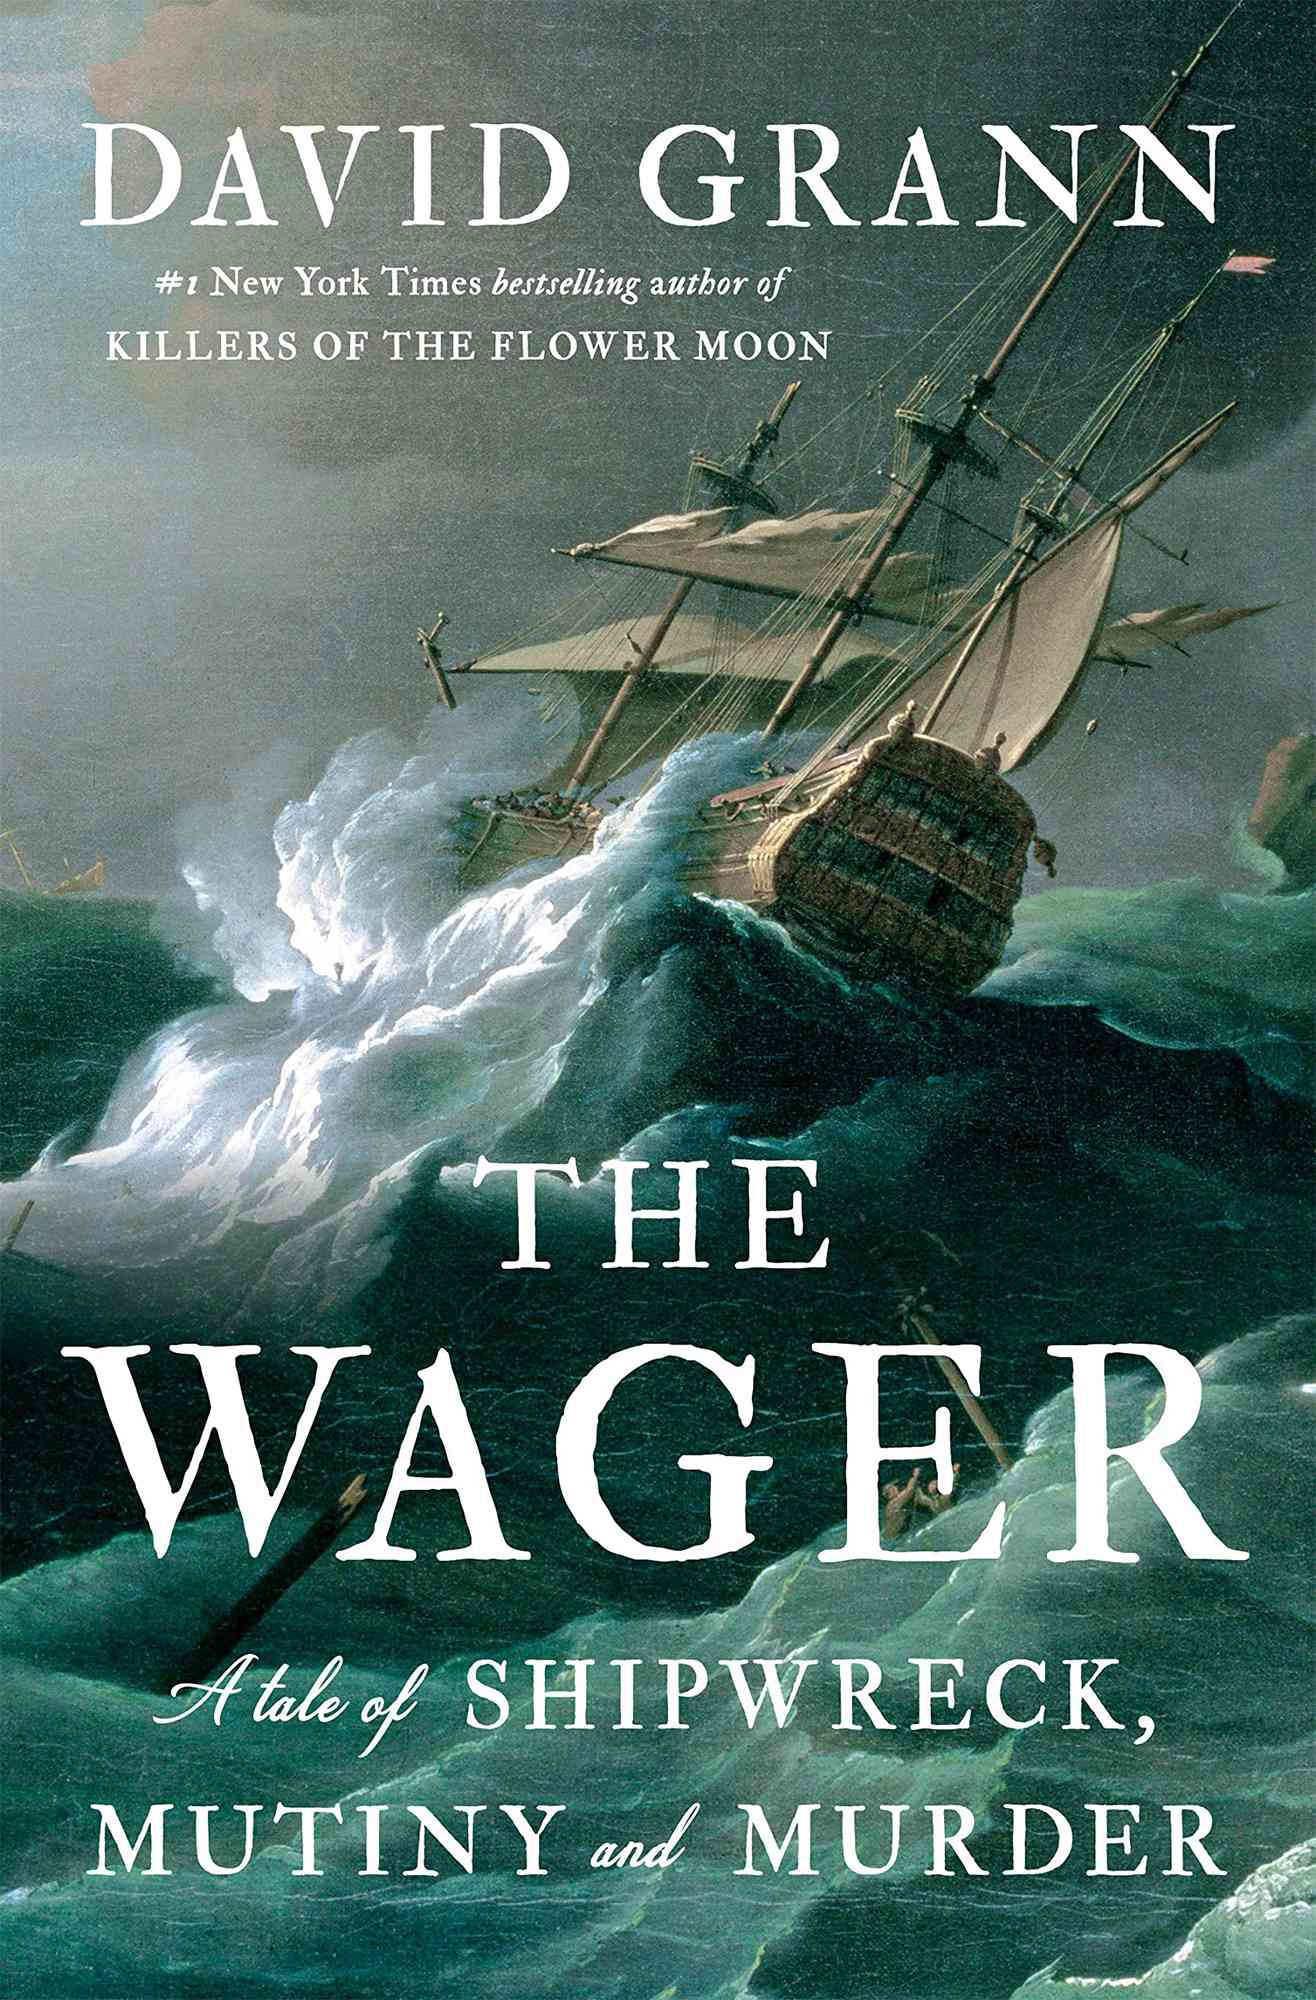 The Wager by David Grann